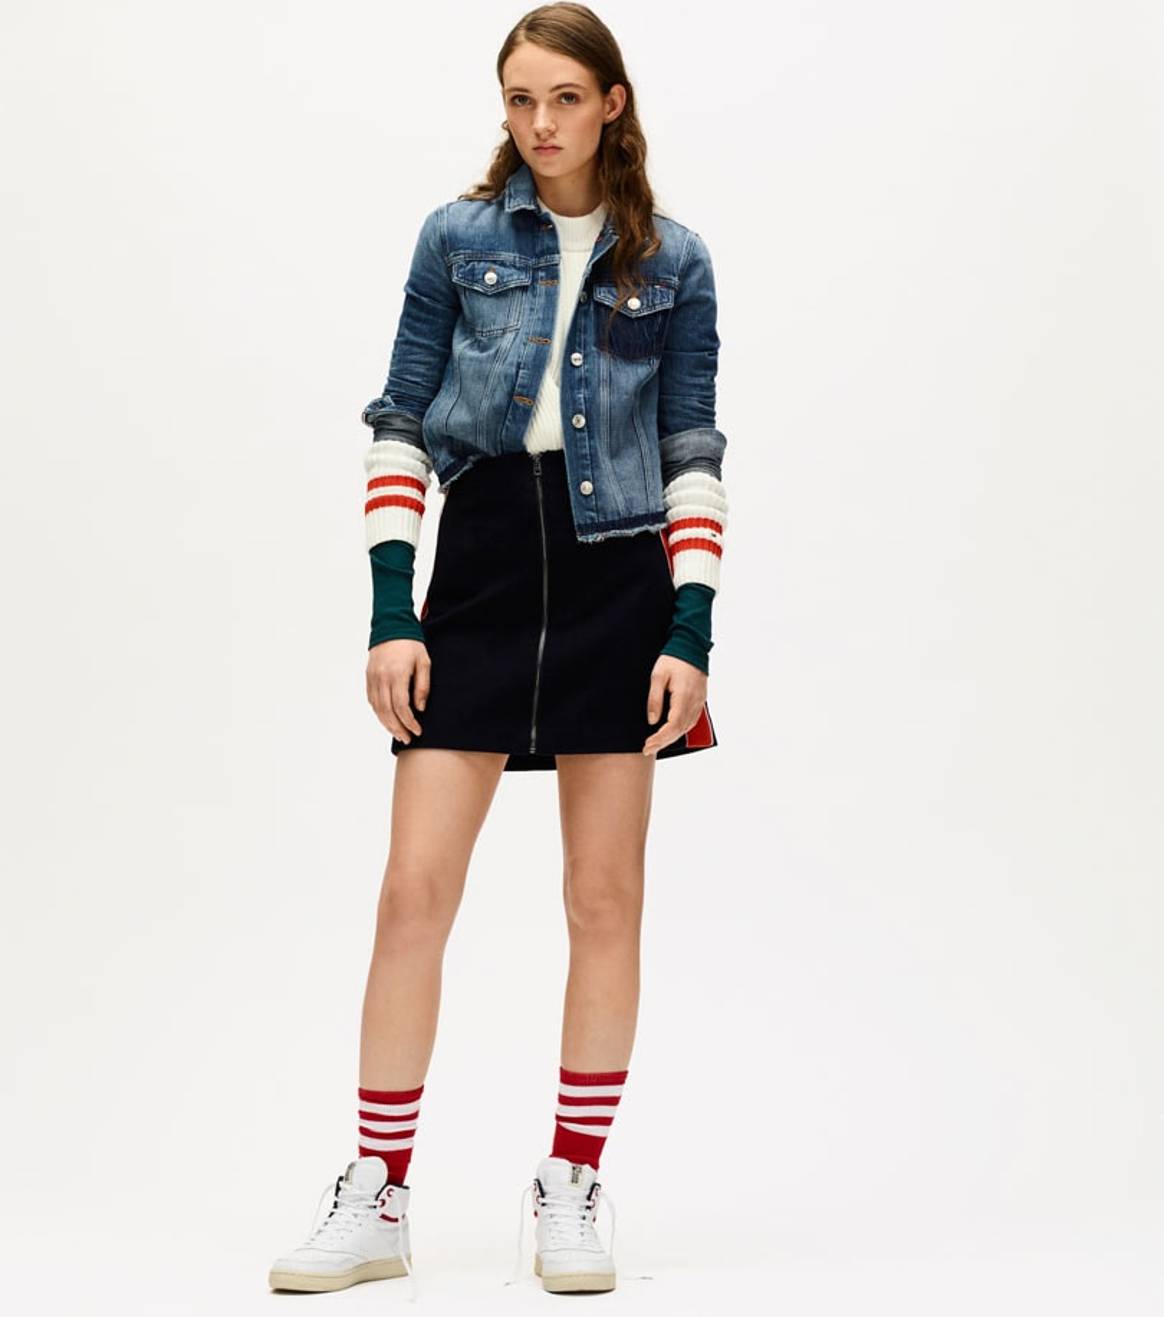 Say goodbye to Hilfiger Denim and hello to Tommy Jeans